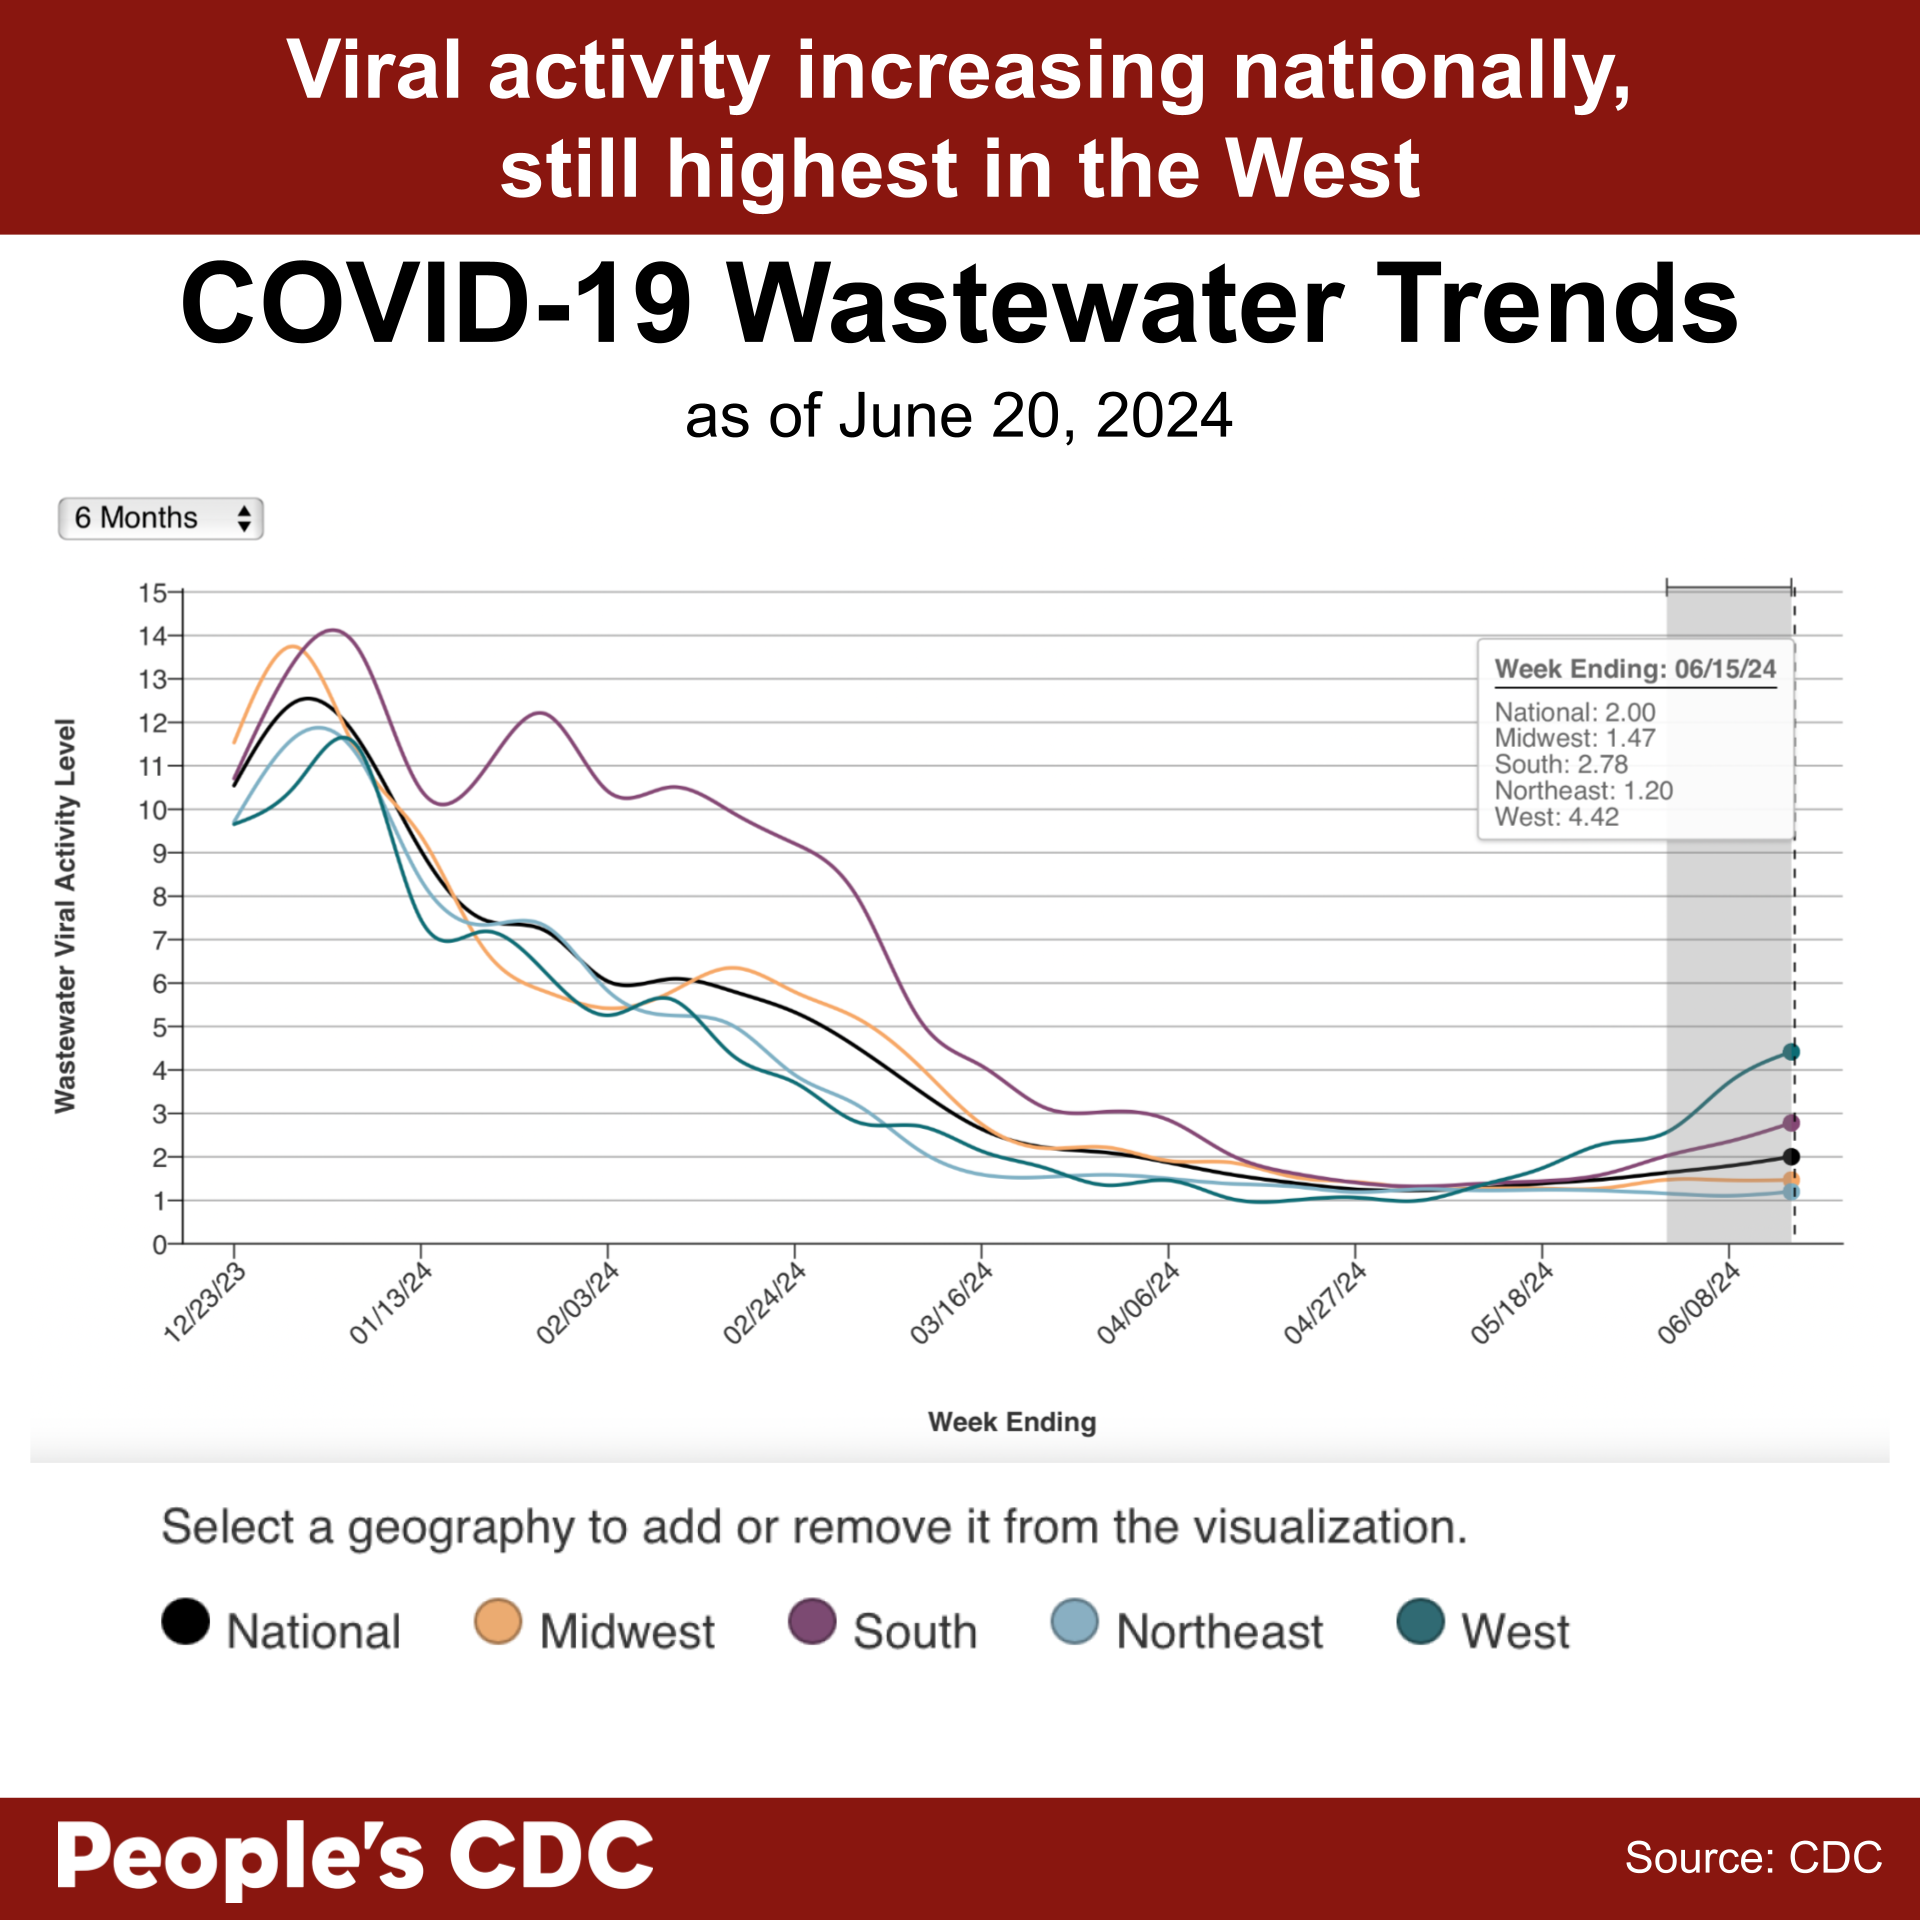 A line graph with the title, “COVID-19 Wastewater Trends as of June 20, 2024” with “Wastewater Viral Activity Level” indicated on the left-hand vertical axis, going from 0-15, and “Week Ending” across the horizontal axis, with date labels ranging from 12/23/23 to 6/06/24, with the graph extending through 6/15/24. A key at the bottom indicates line colors. National is black, Midwest is orange, South is purple, Northeast is light blue, and West is green. Overall, levels are trending upward in all regions, with the West showing the greatest increase. Within the gray-shaded provisional data provided for the last 2 weeks, wastewater levels in the West appear to be significantly rising, while there is an increase in all other areas. Text above the graph reads “Viral activity increasing nationally, still highest in the west. Text below: People’s CDC. Source: CDC.”